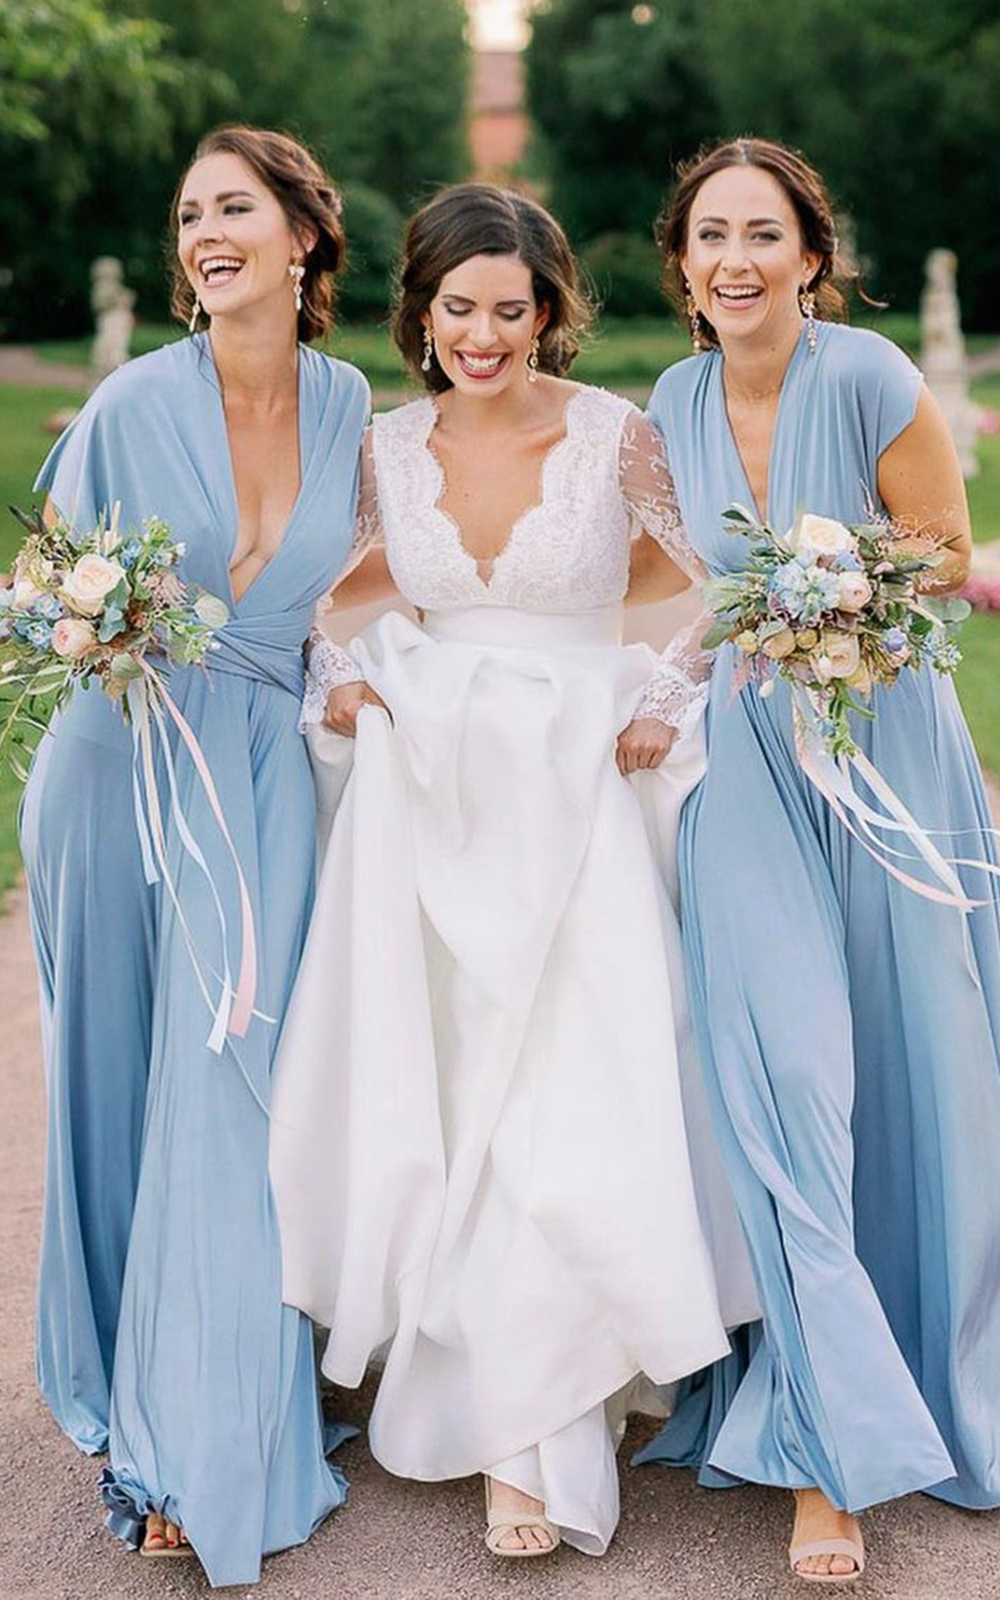 38 Looks That Prove Bridesmaids' Dresses Can Be Chic